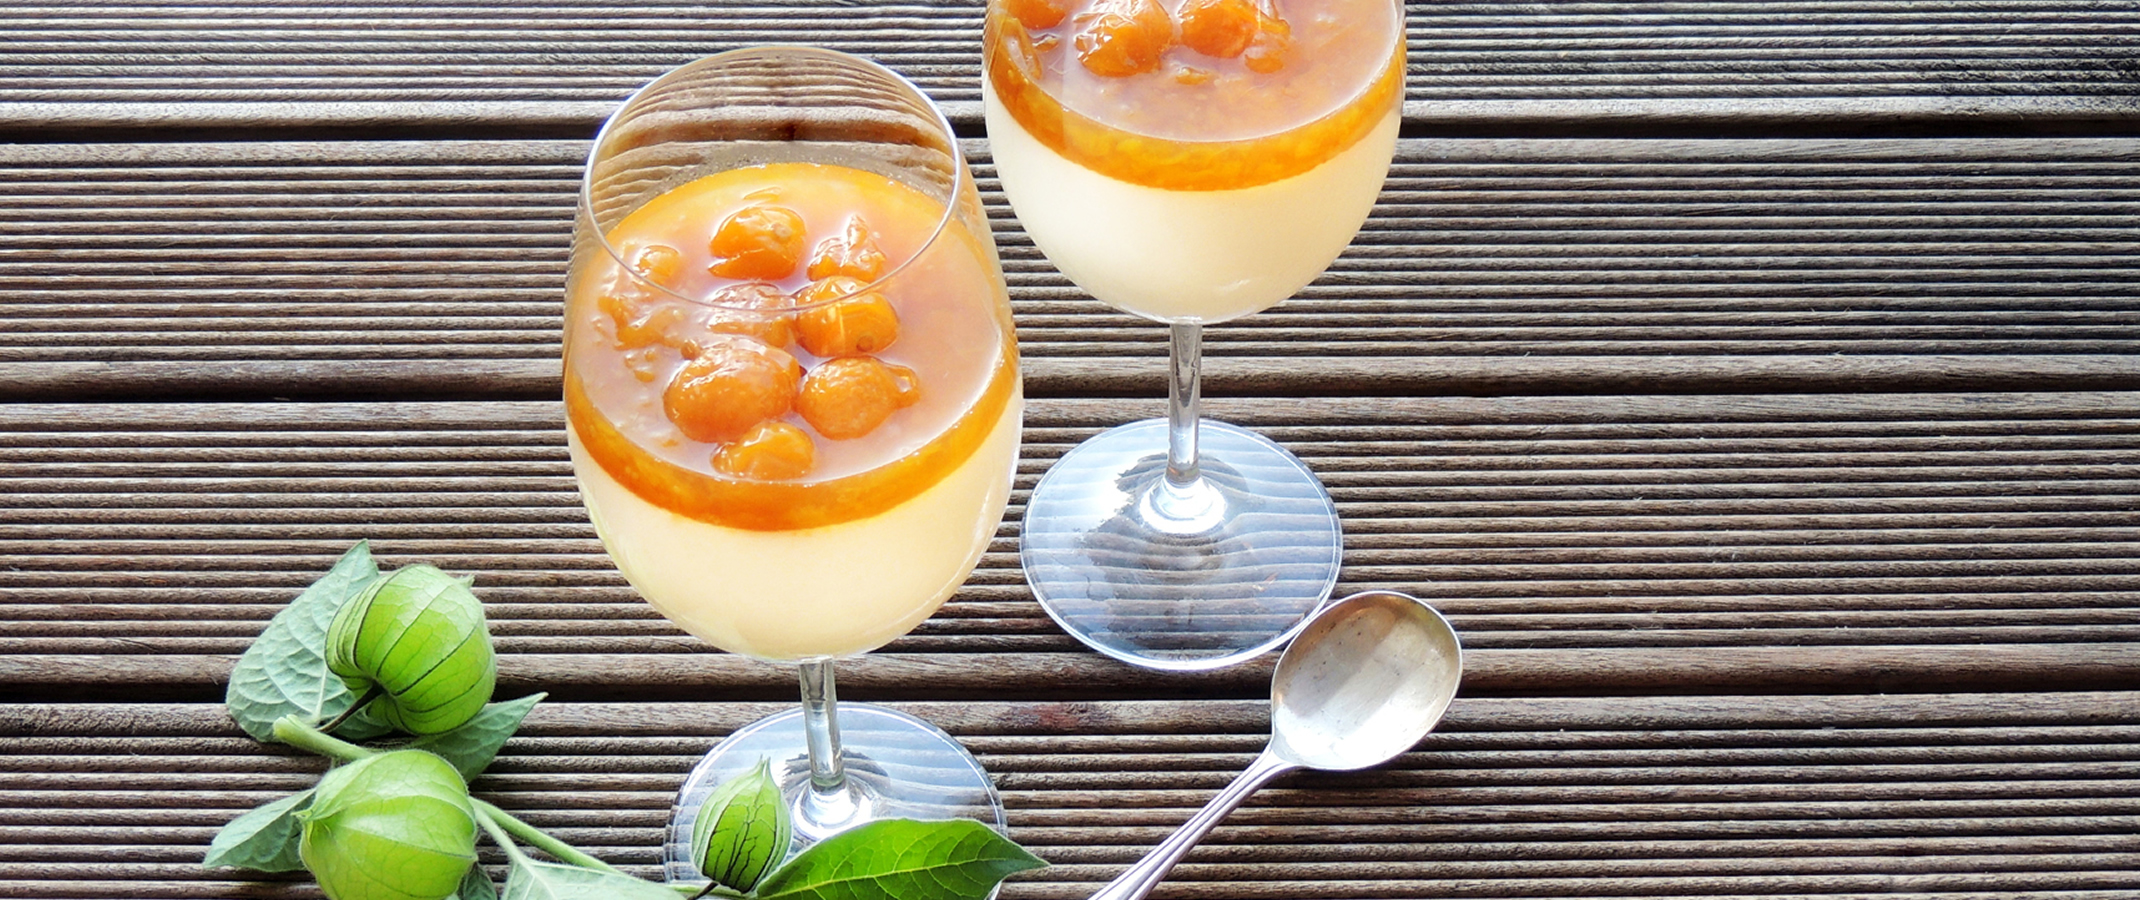 Vanilla Panna Cotta with a Verjuice-Gooseberry Compote